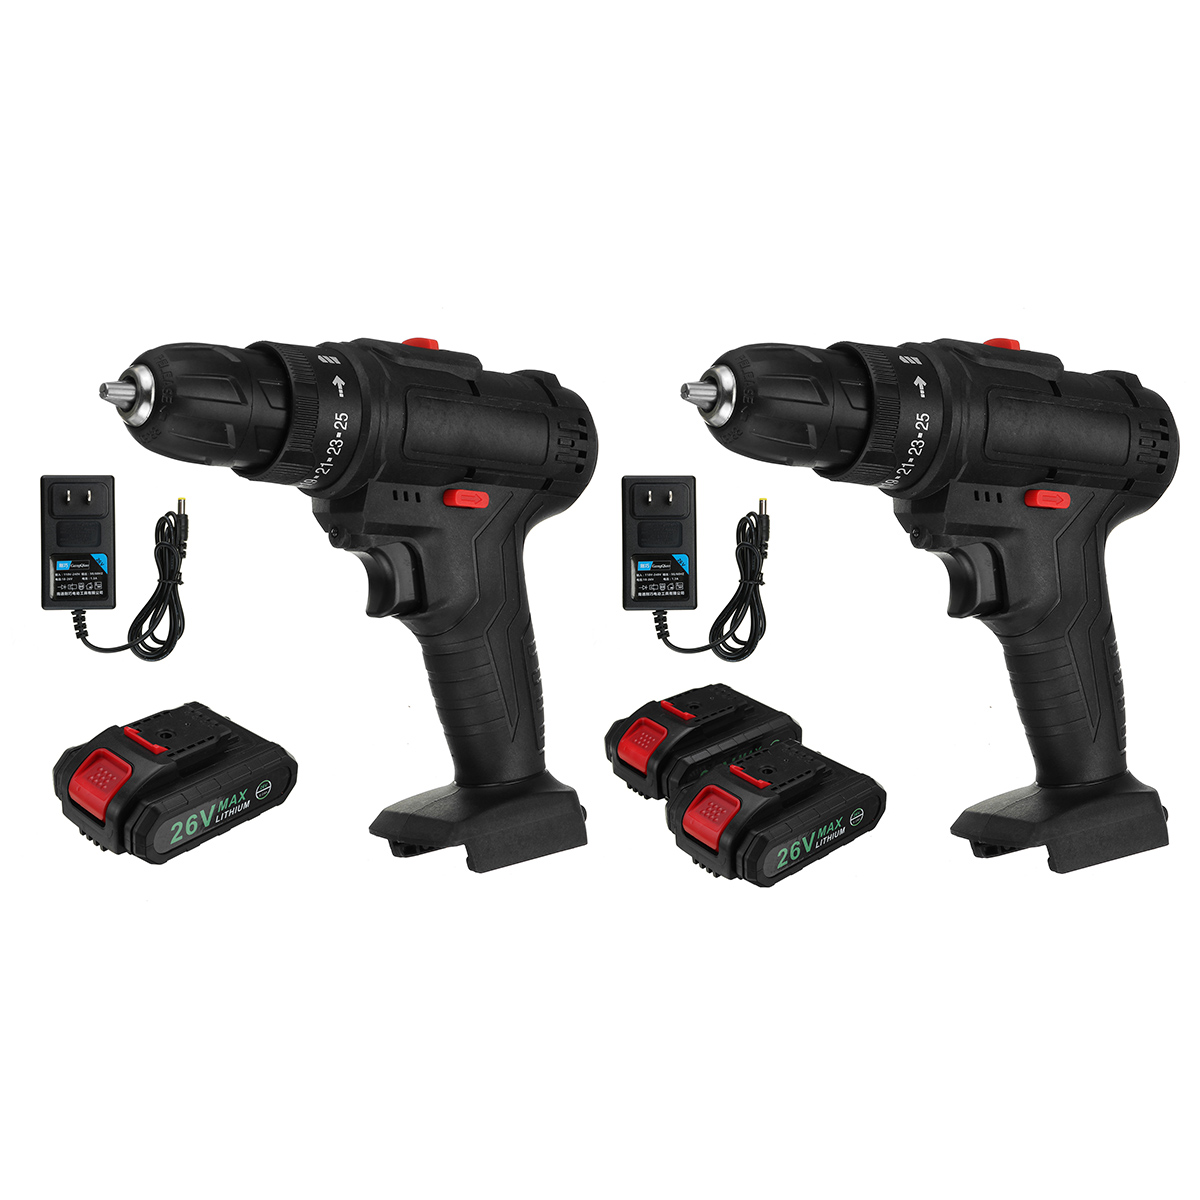 48V-1500W-Electric-Drill-28Nm-25-Gears-LED-Light-Screwdriver-Power-Tool-W-1PC2PCS-Battery-1791184-1